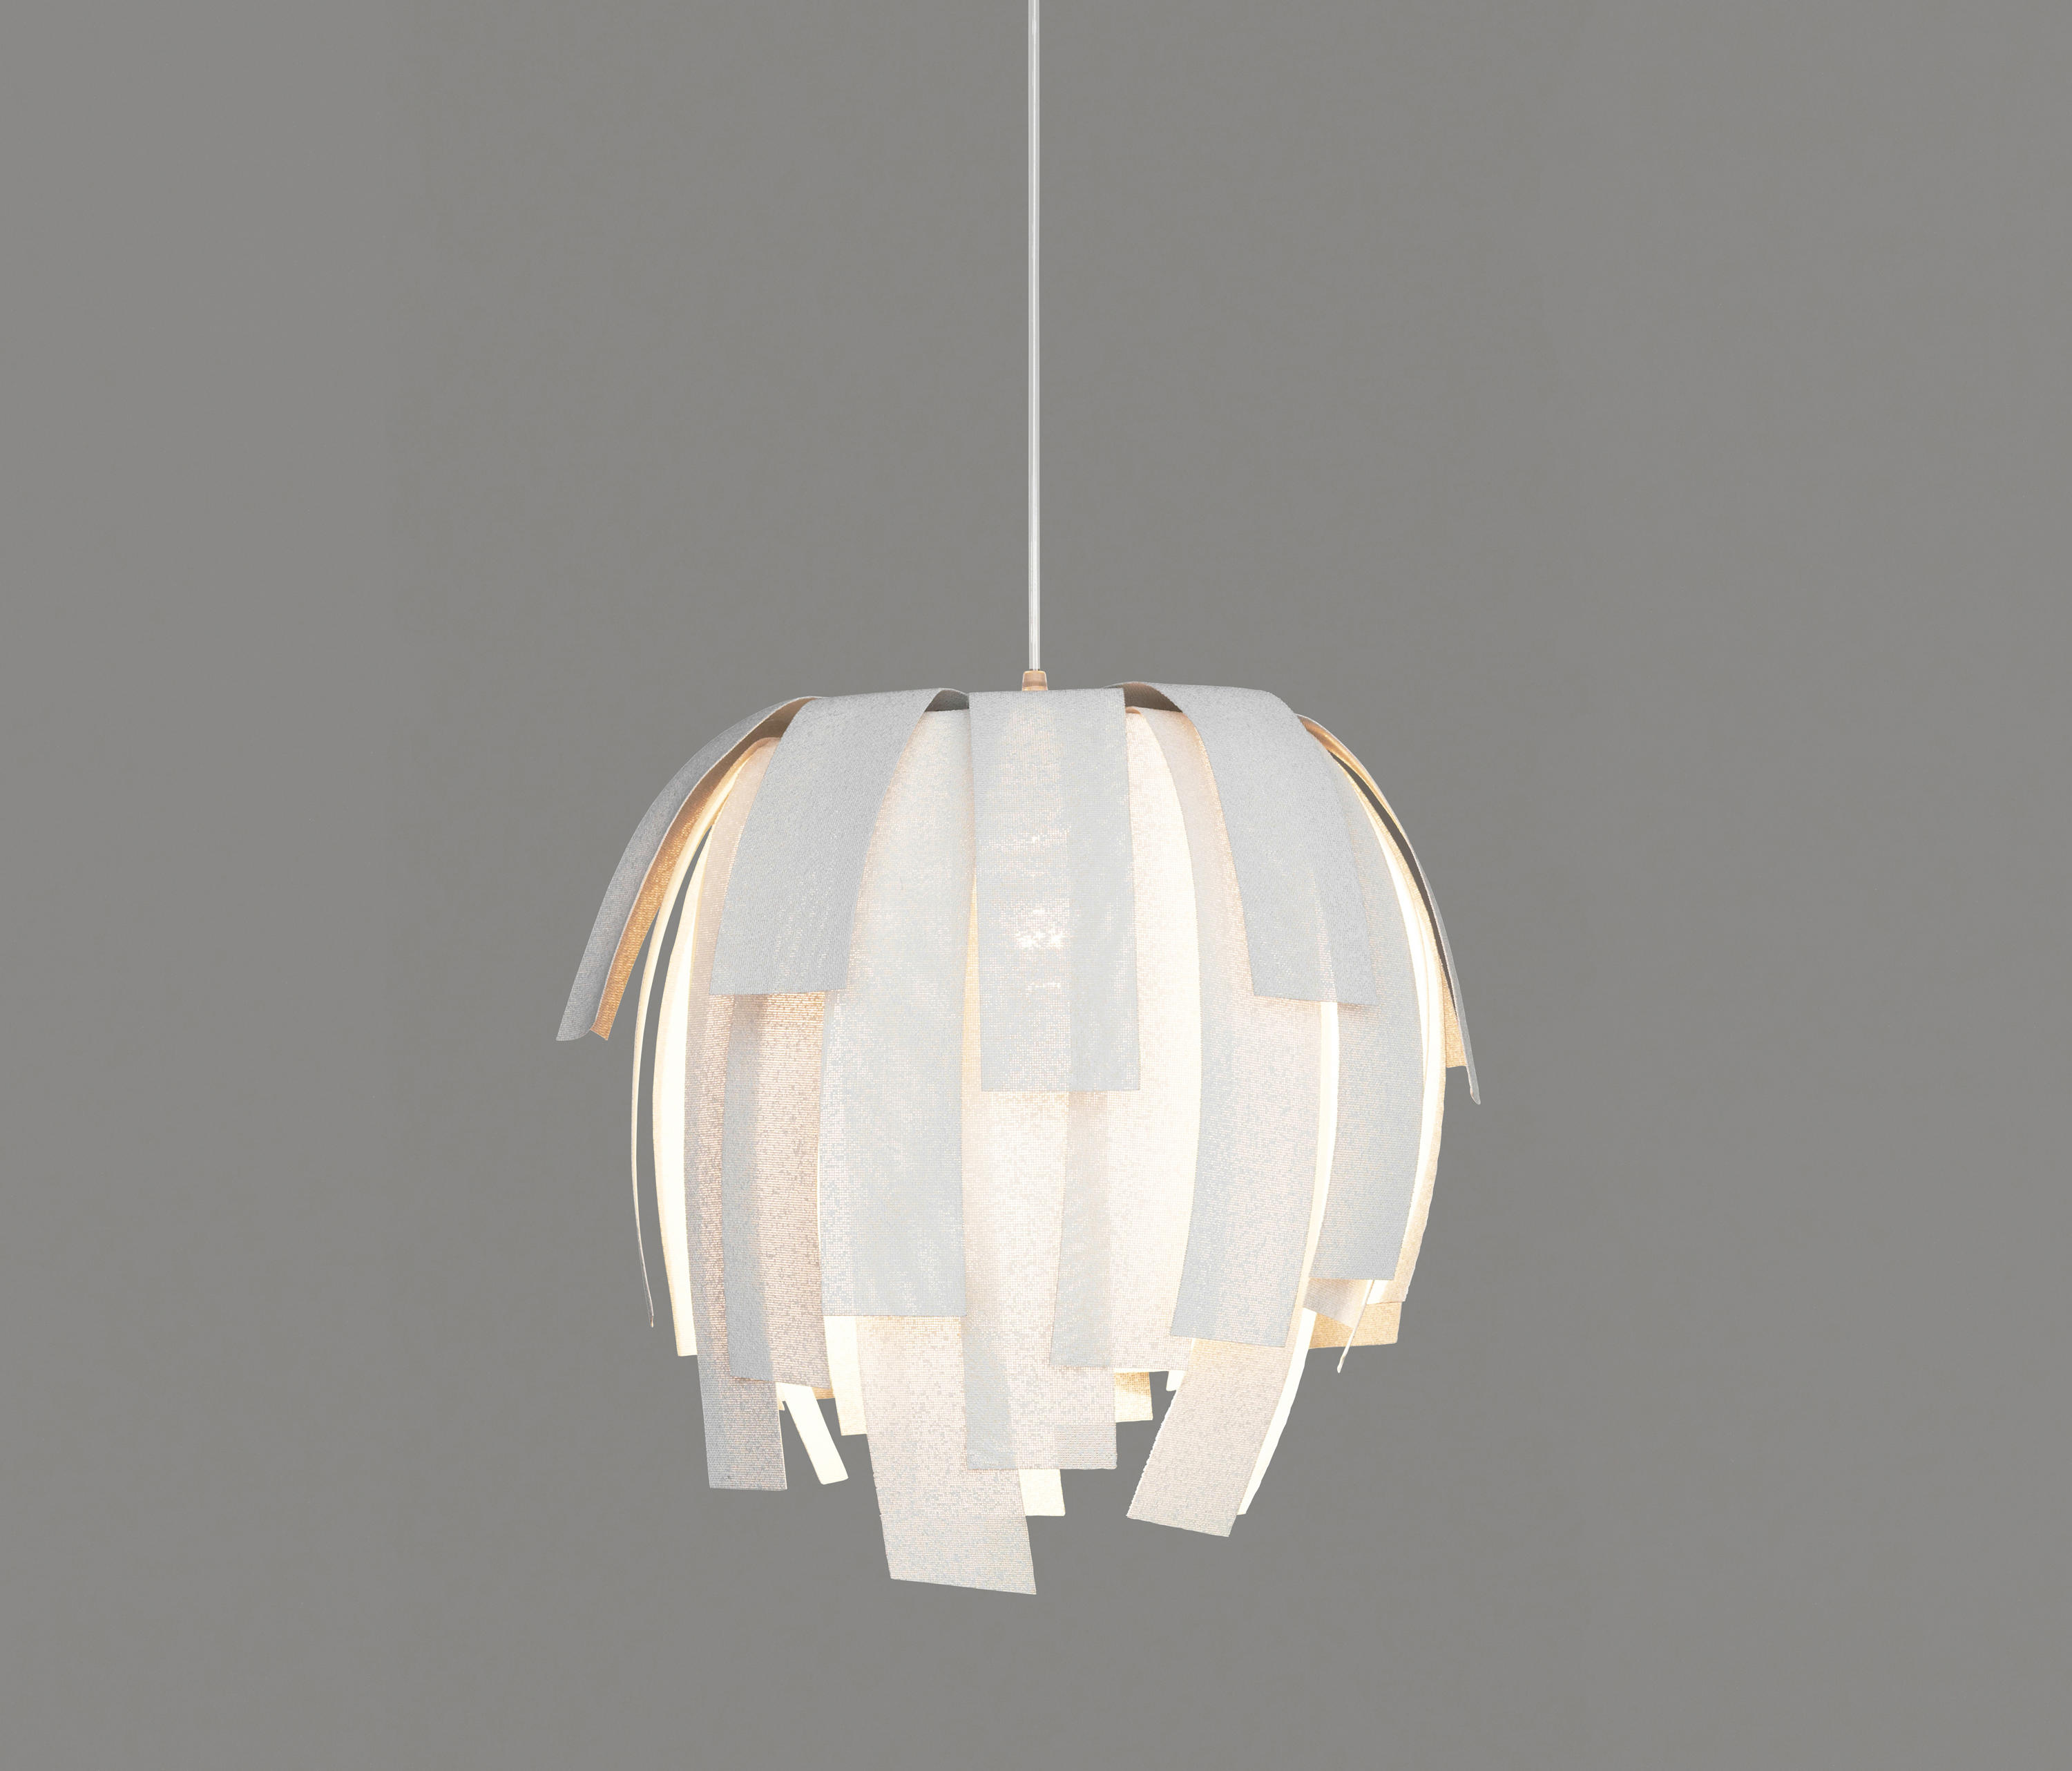 LUISA LS04G - Suspended lights from a by arturo alvarez | Architonic